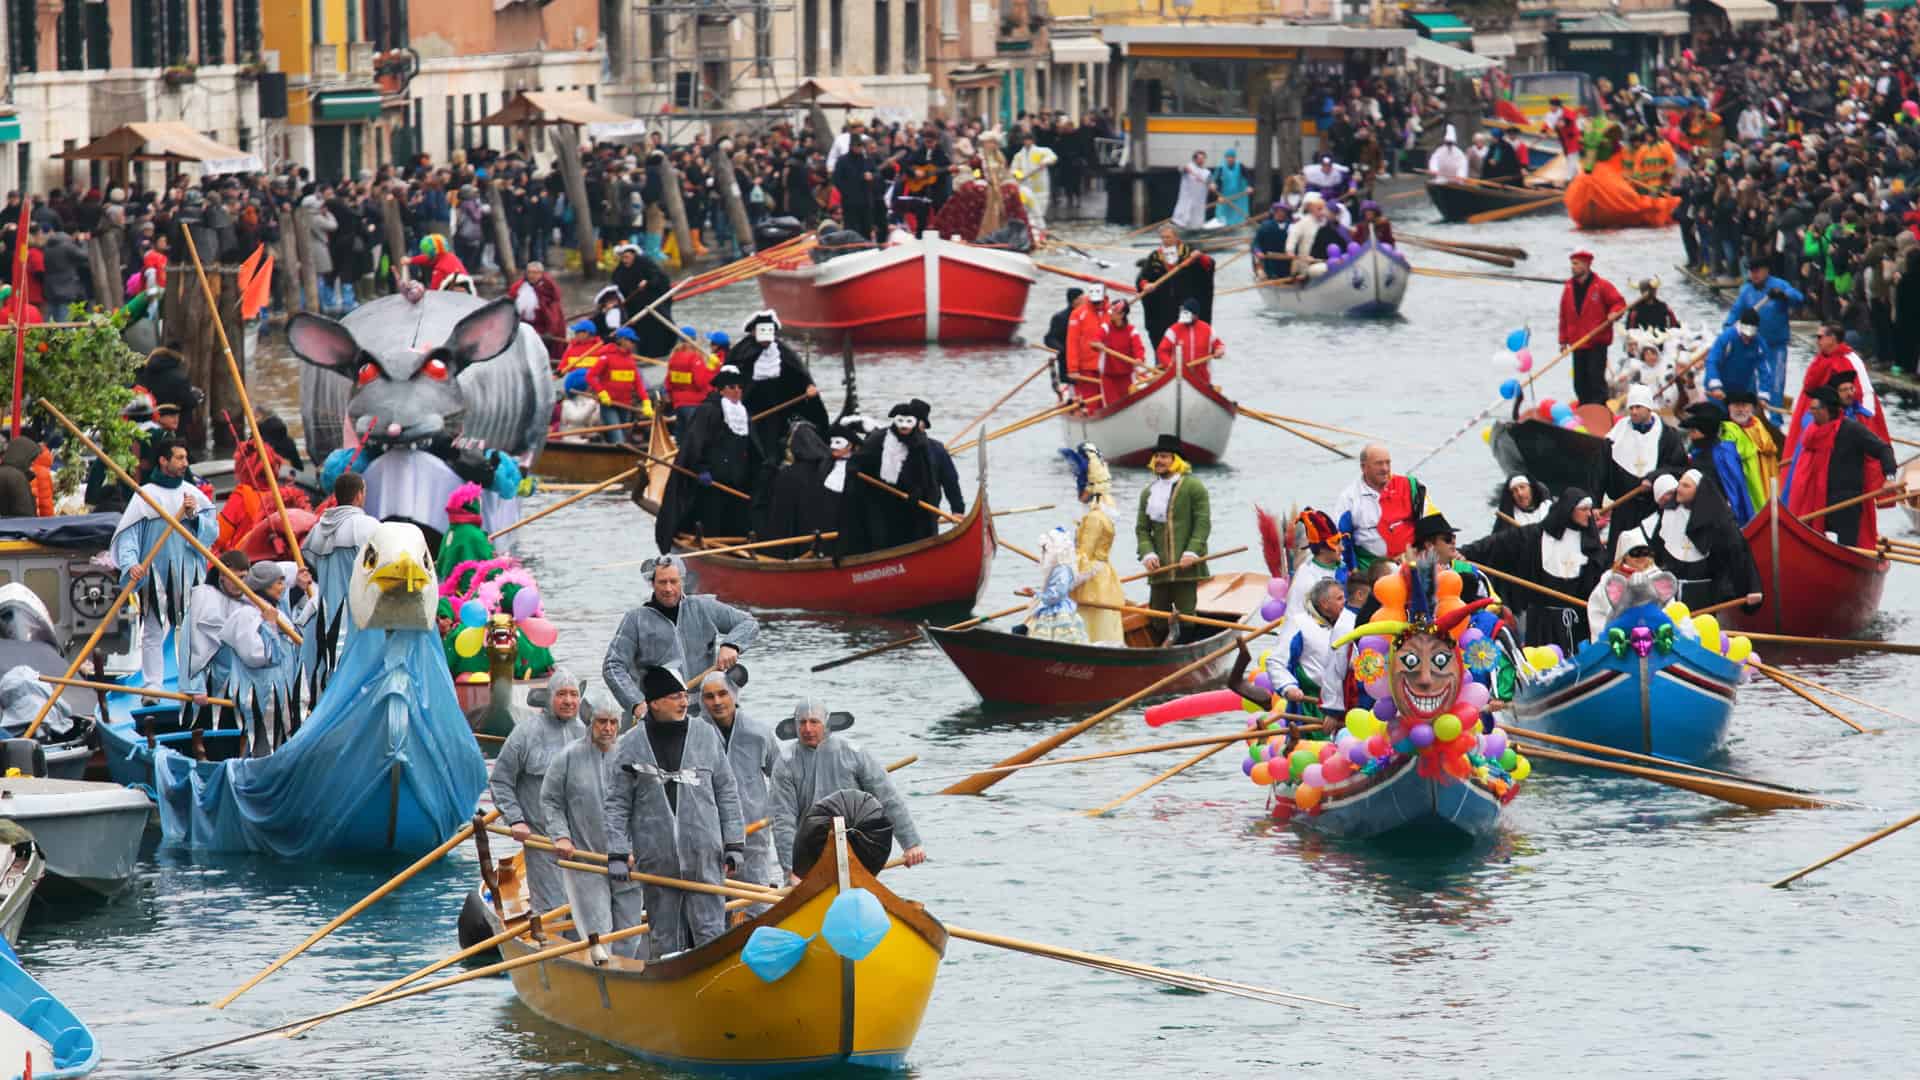 Gondolas in Venice Italy during a colorful family event carnival